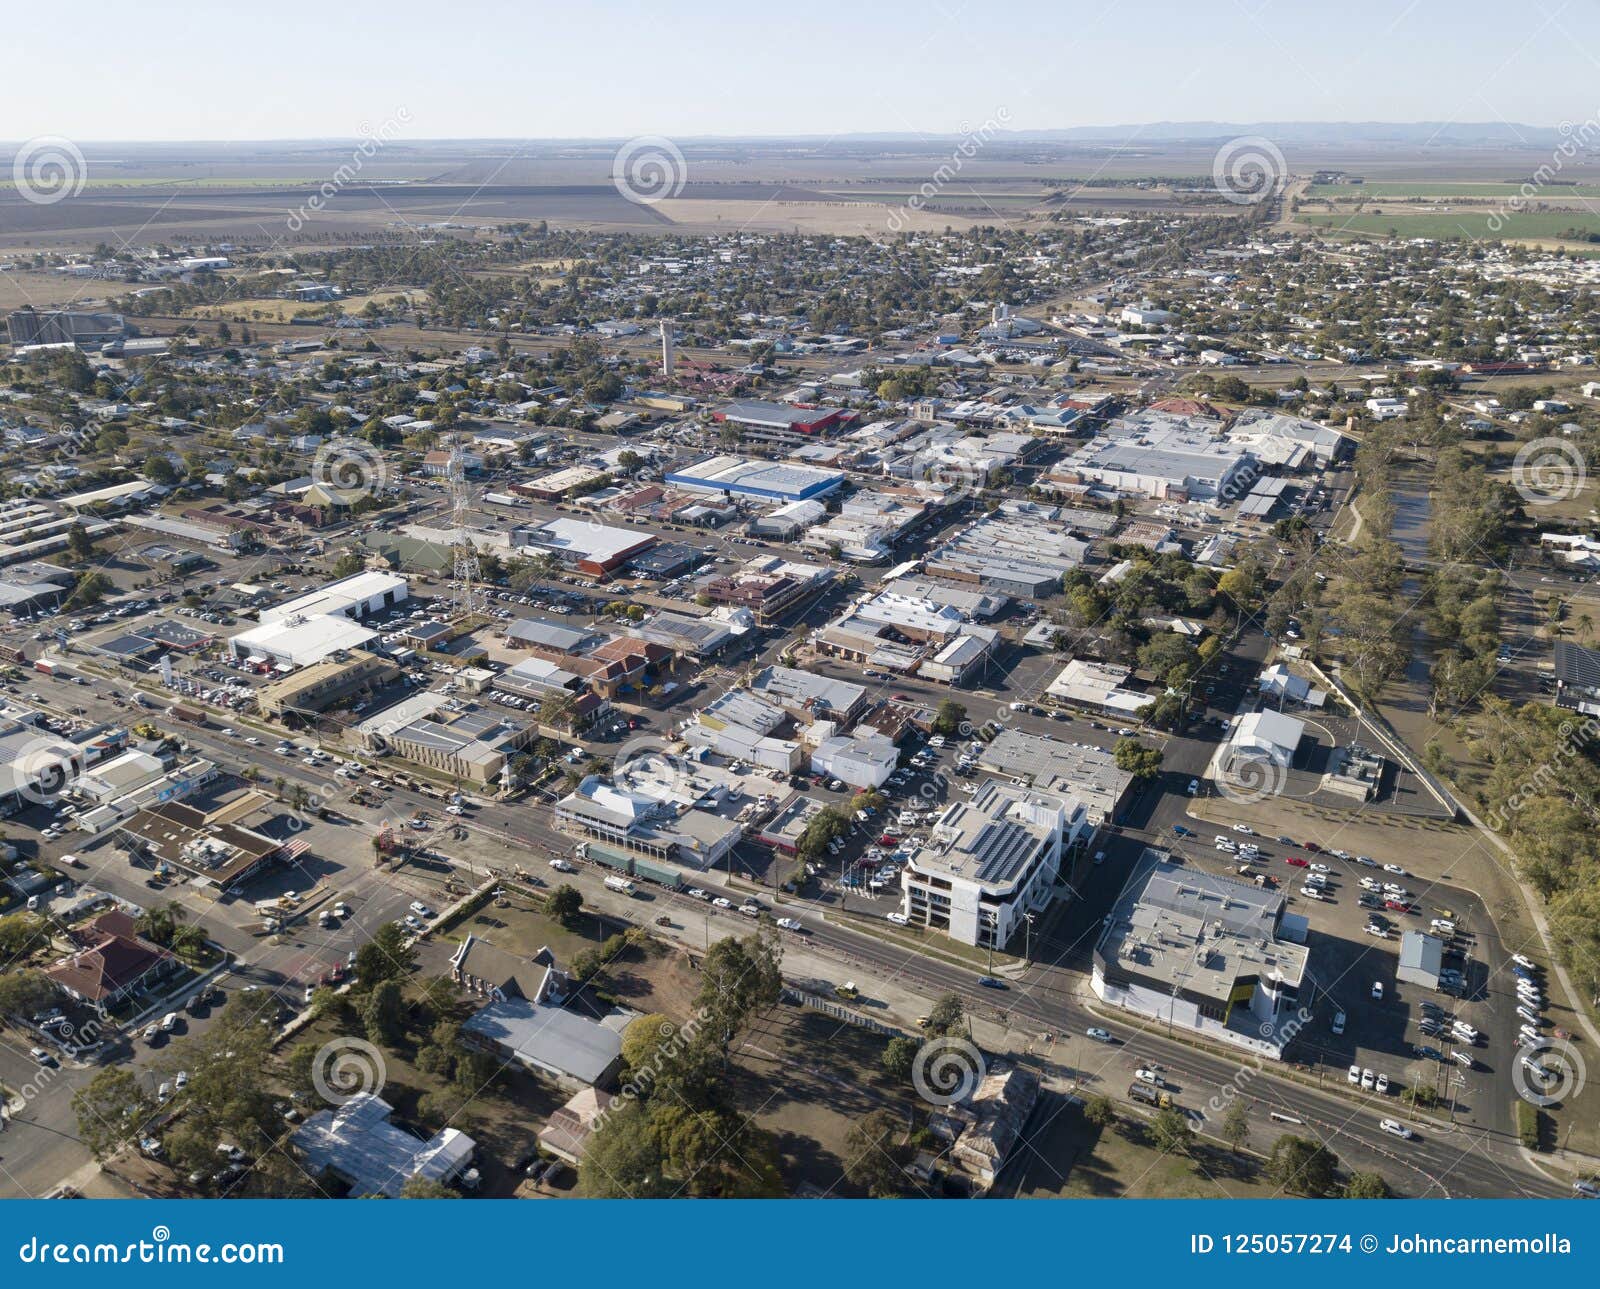 the queensland town of dalby.